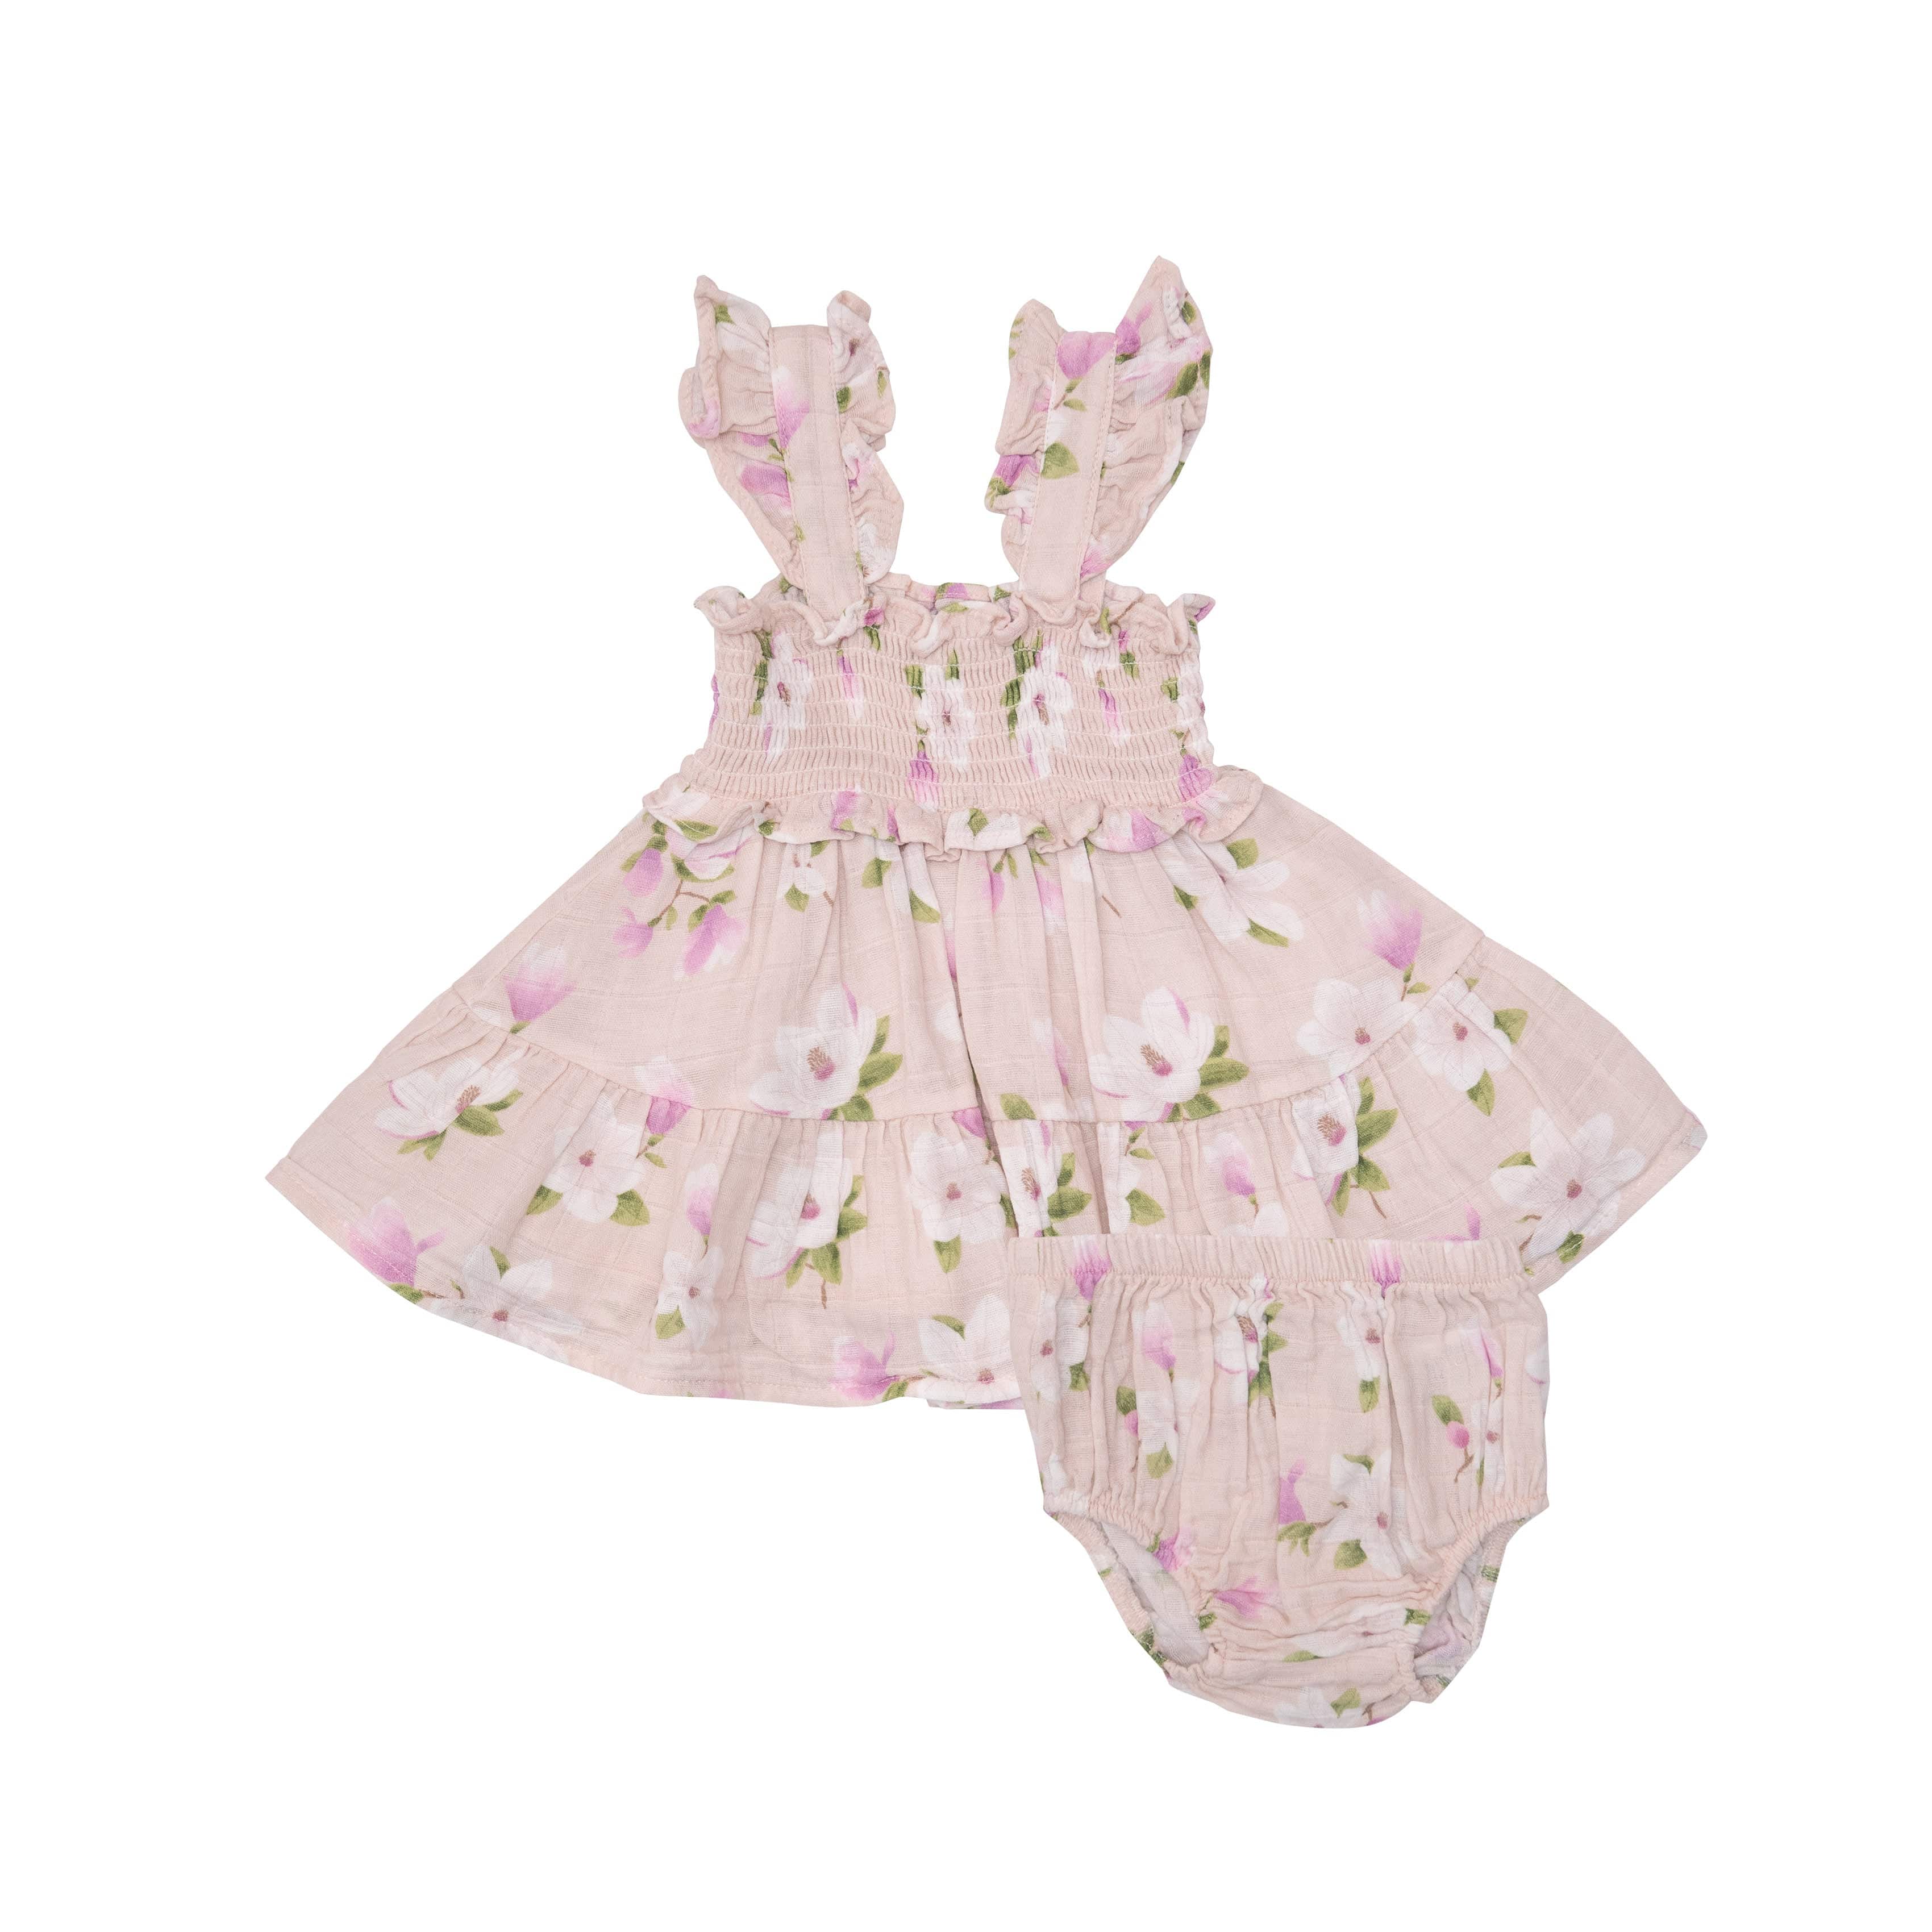 Southern Magnolias Smocked Ruffle Sundress & Diaper Cover - Twinkle Twinkle Little One